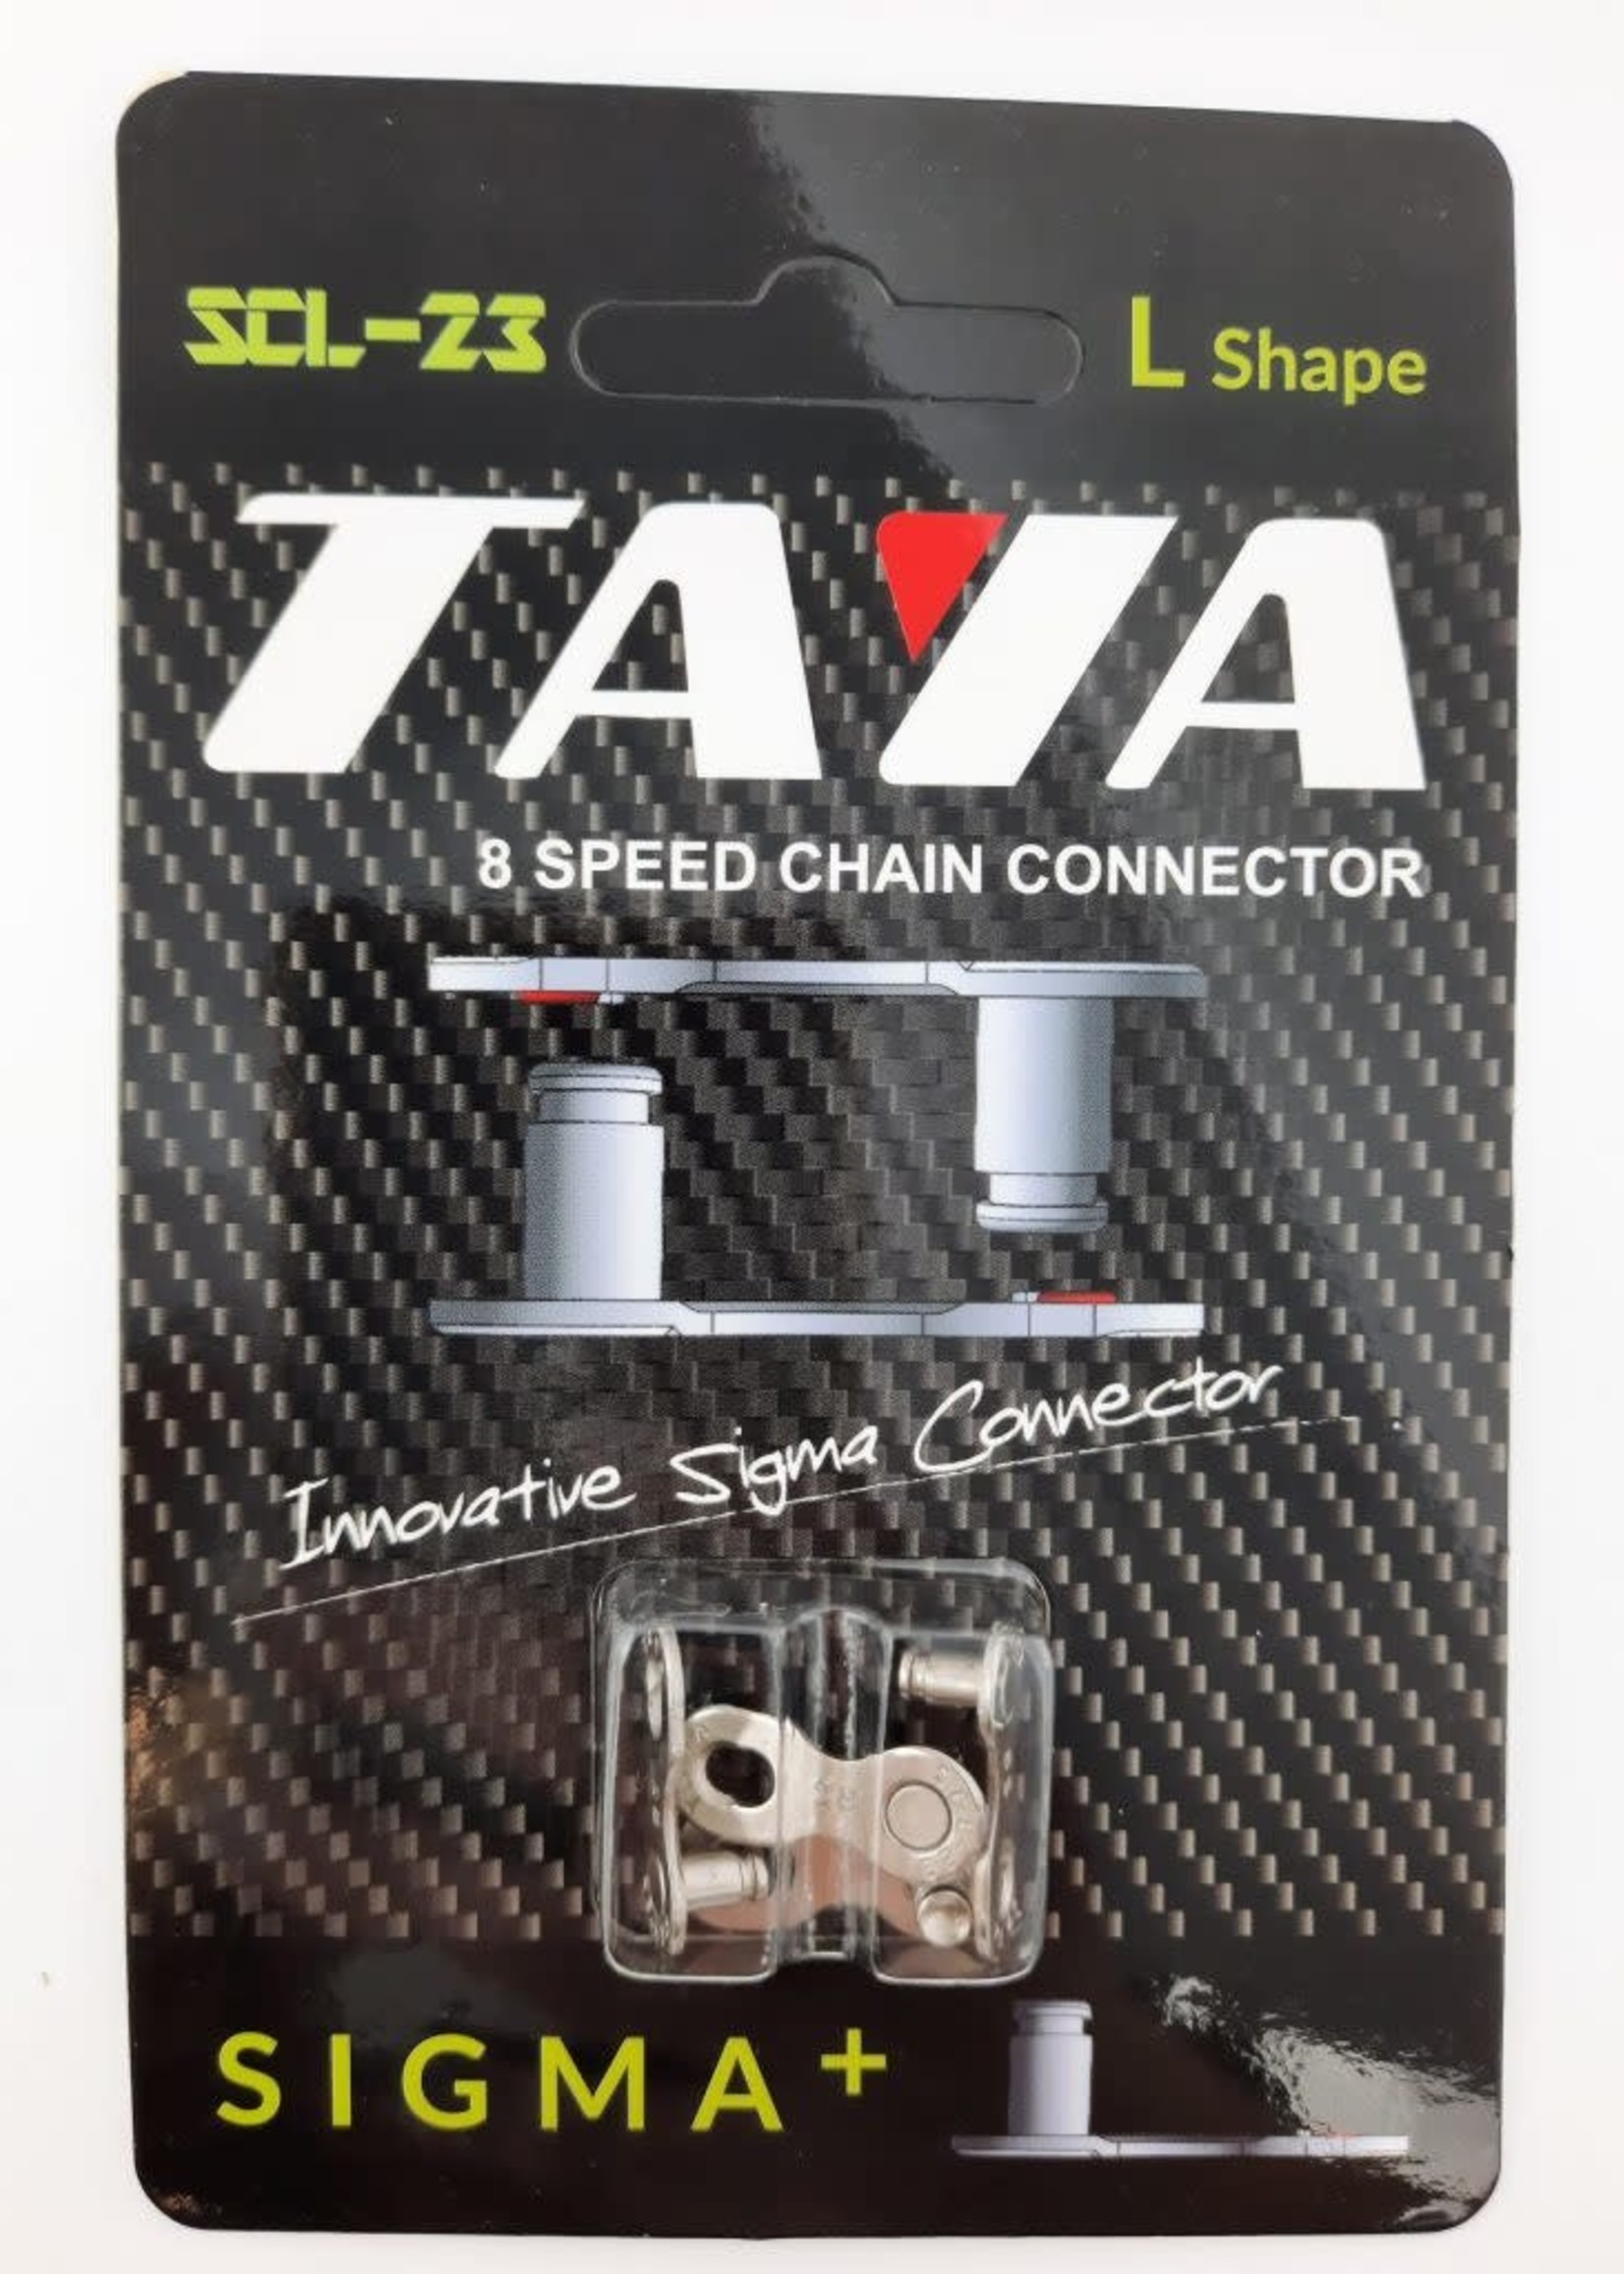 Taya chain links for 7-8 speed card of 2/sets